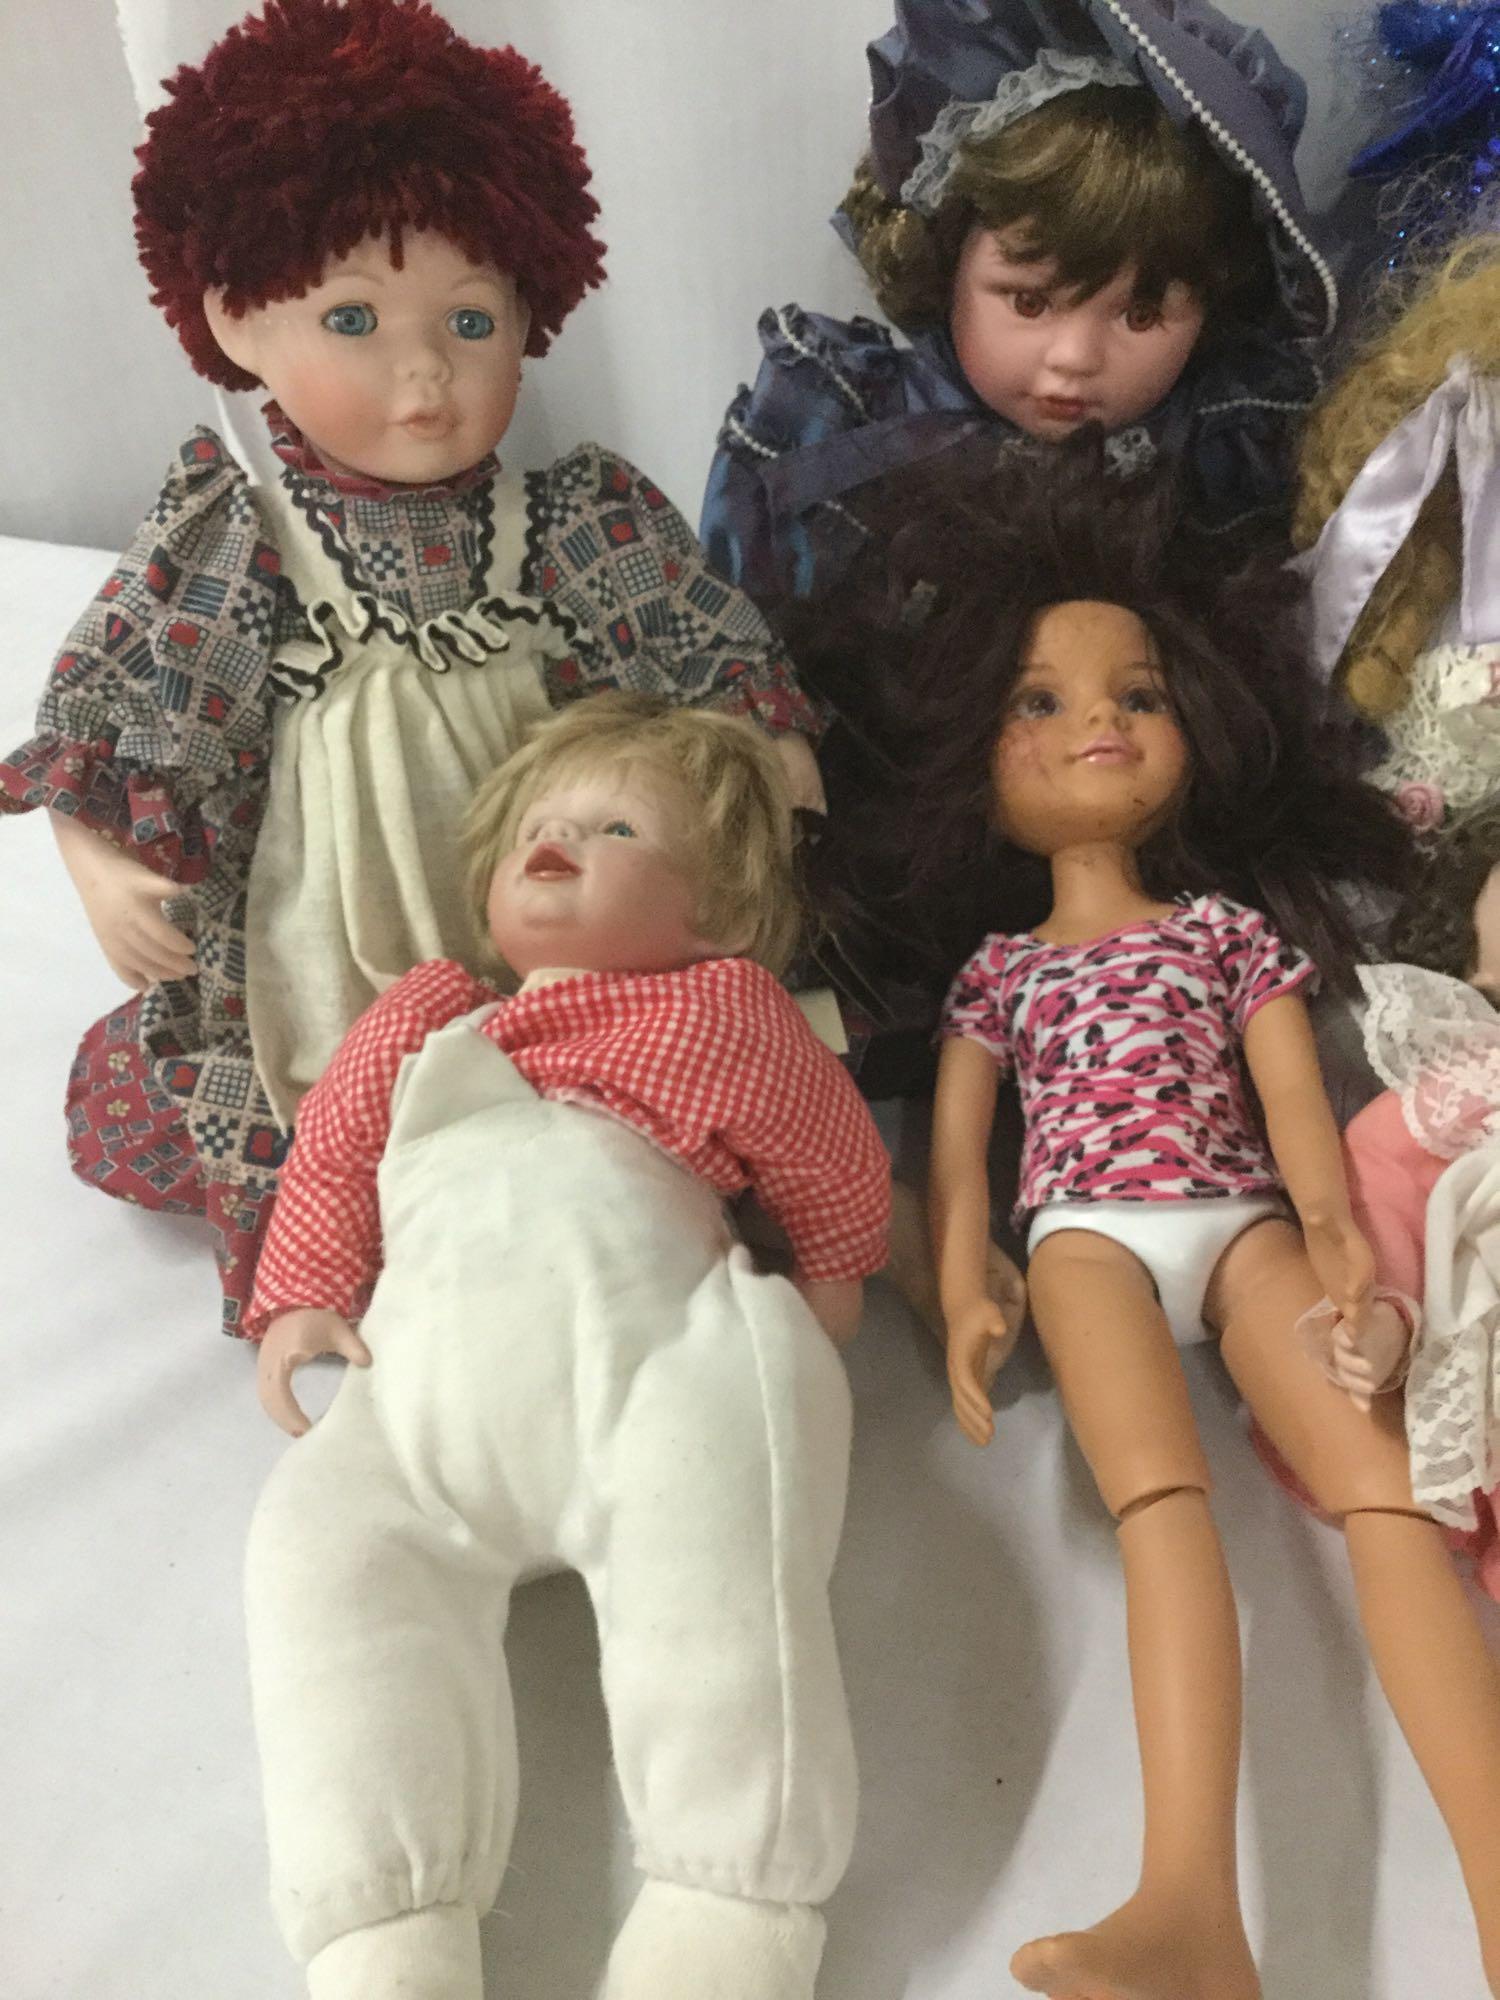 Nine porcelain, vinyl, and composite dolls from makers like Mattel, House of Roses, MGA